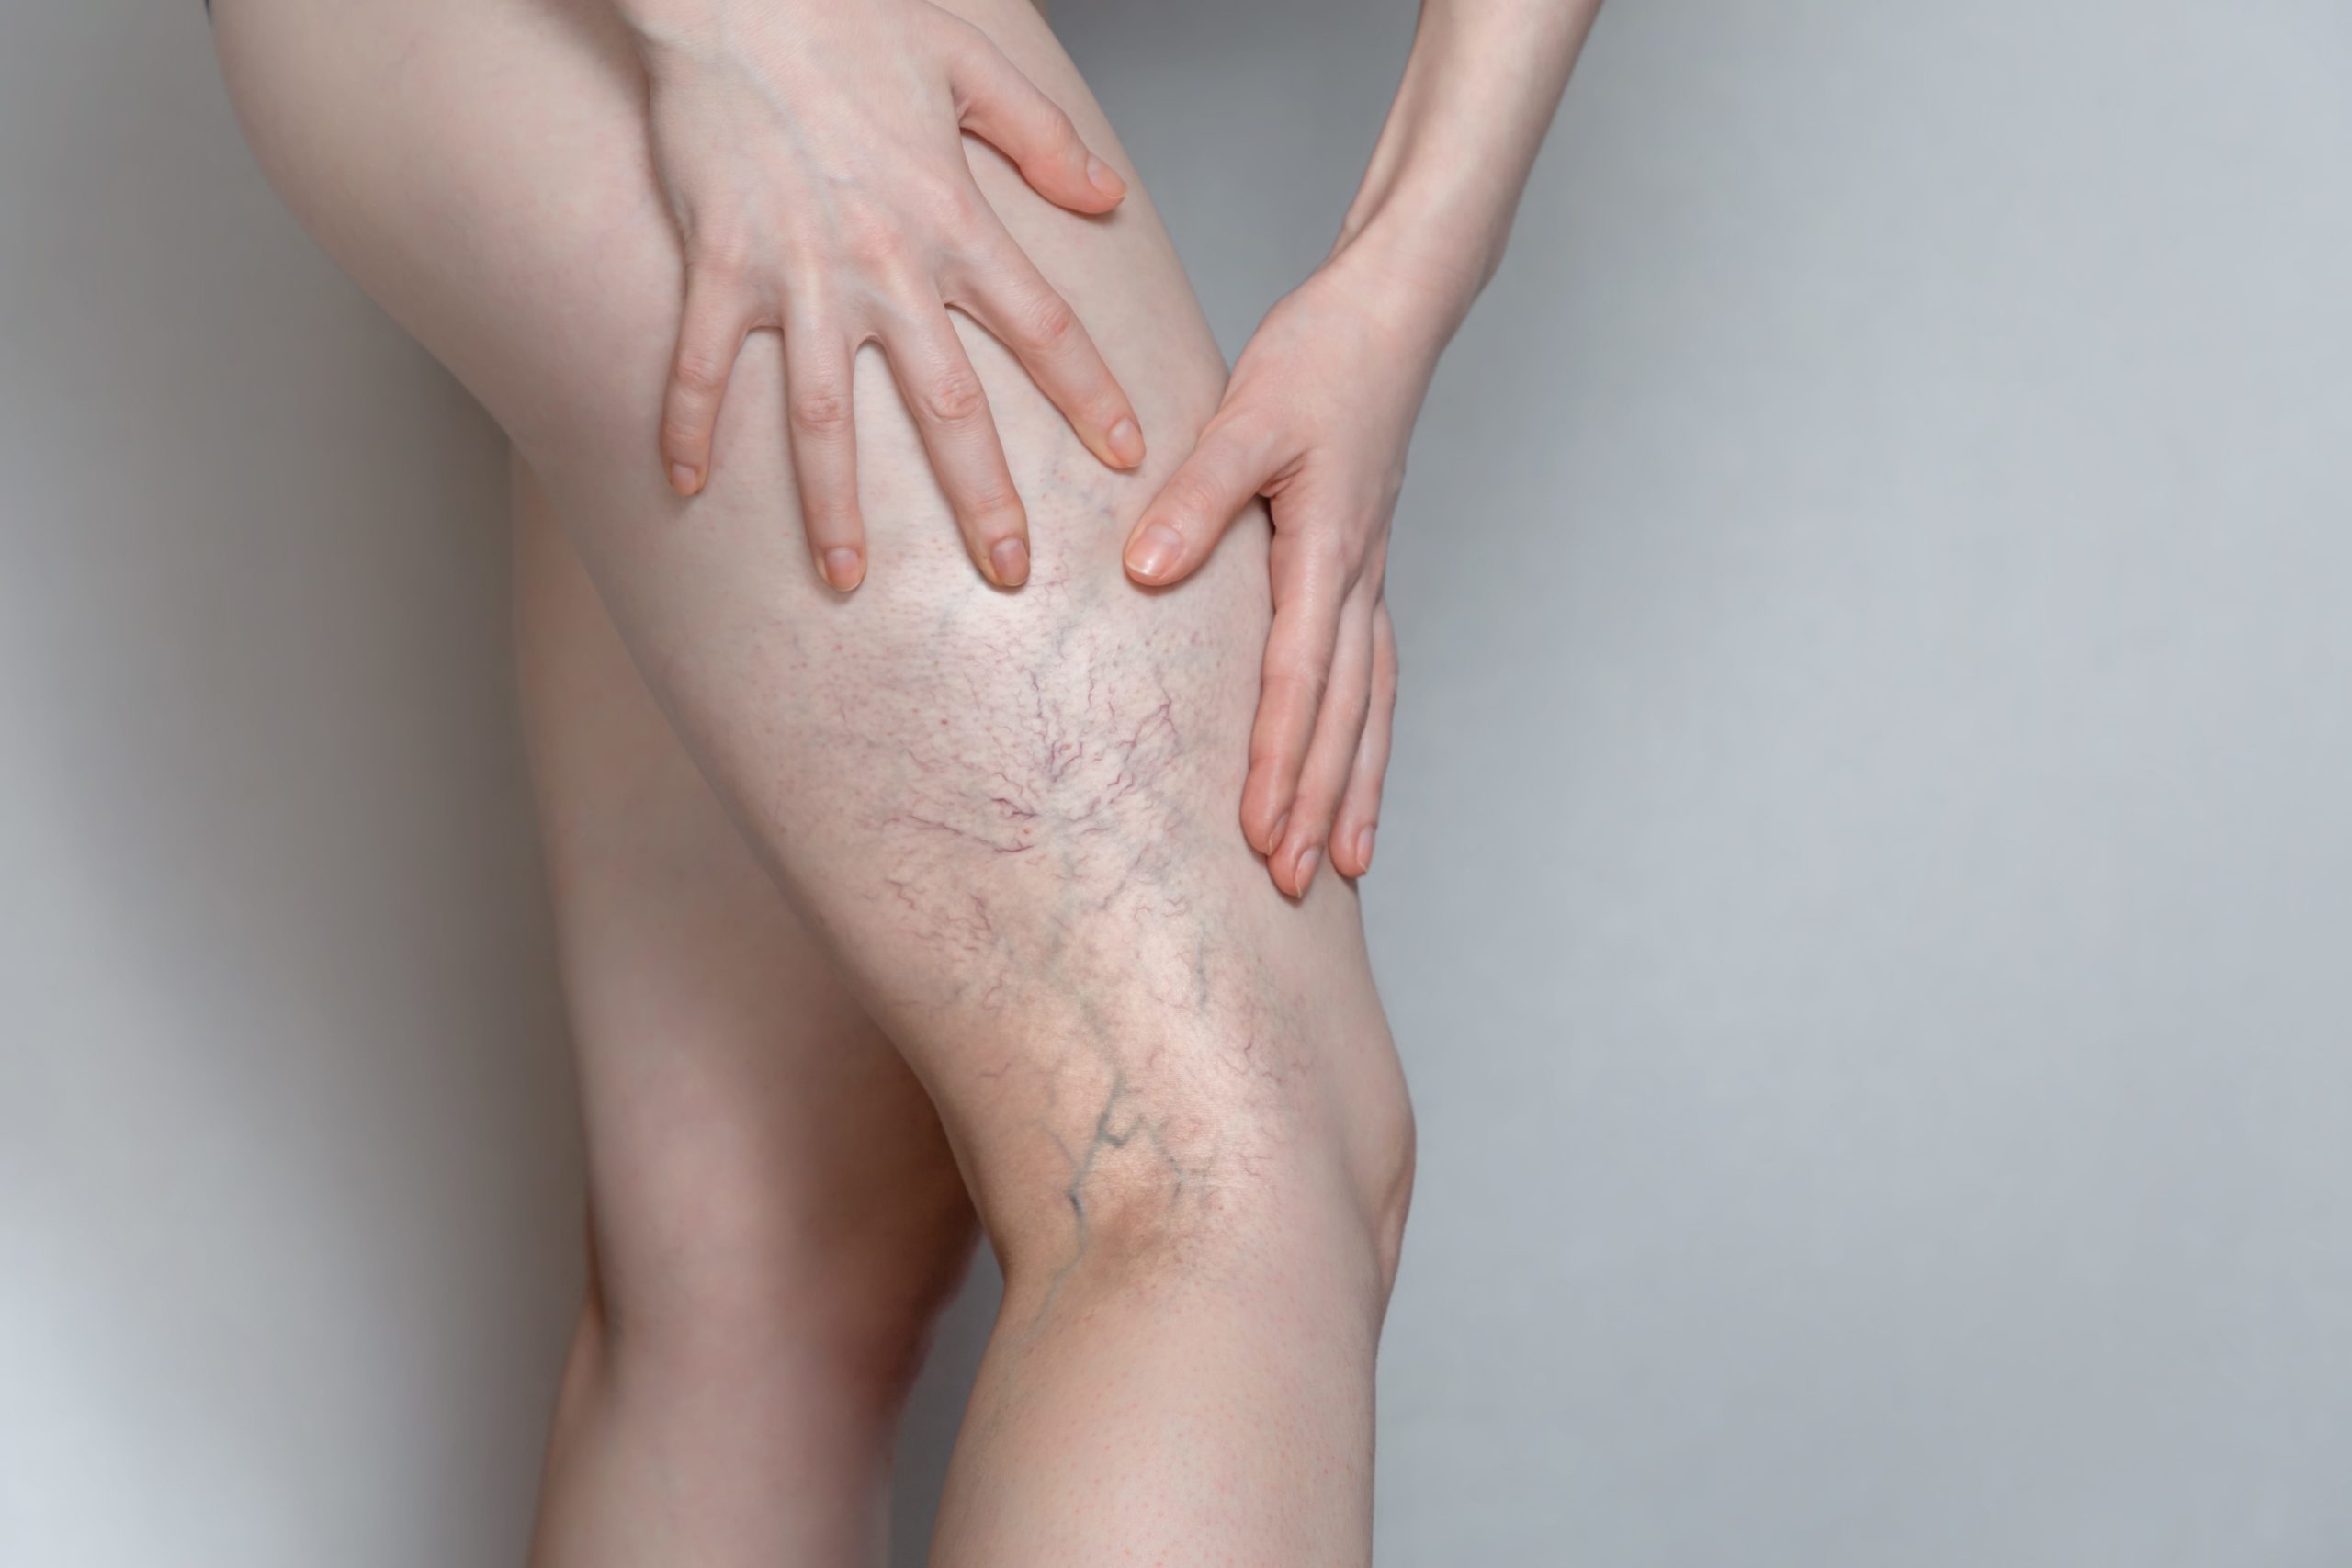 What Is Better For Spider Veins, Laser Or Injections